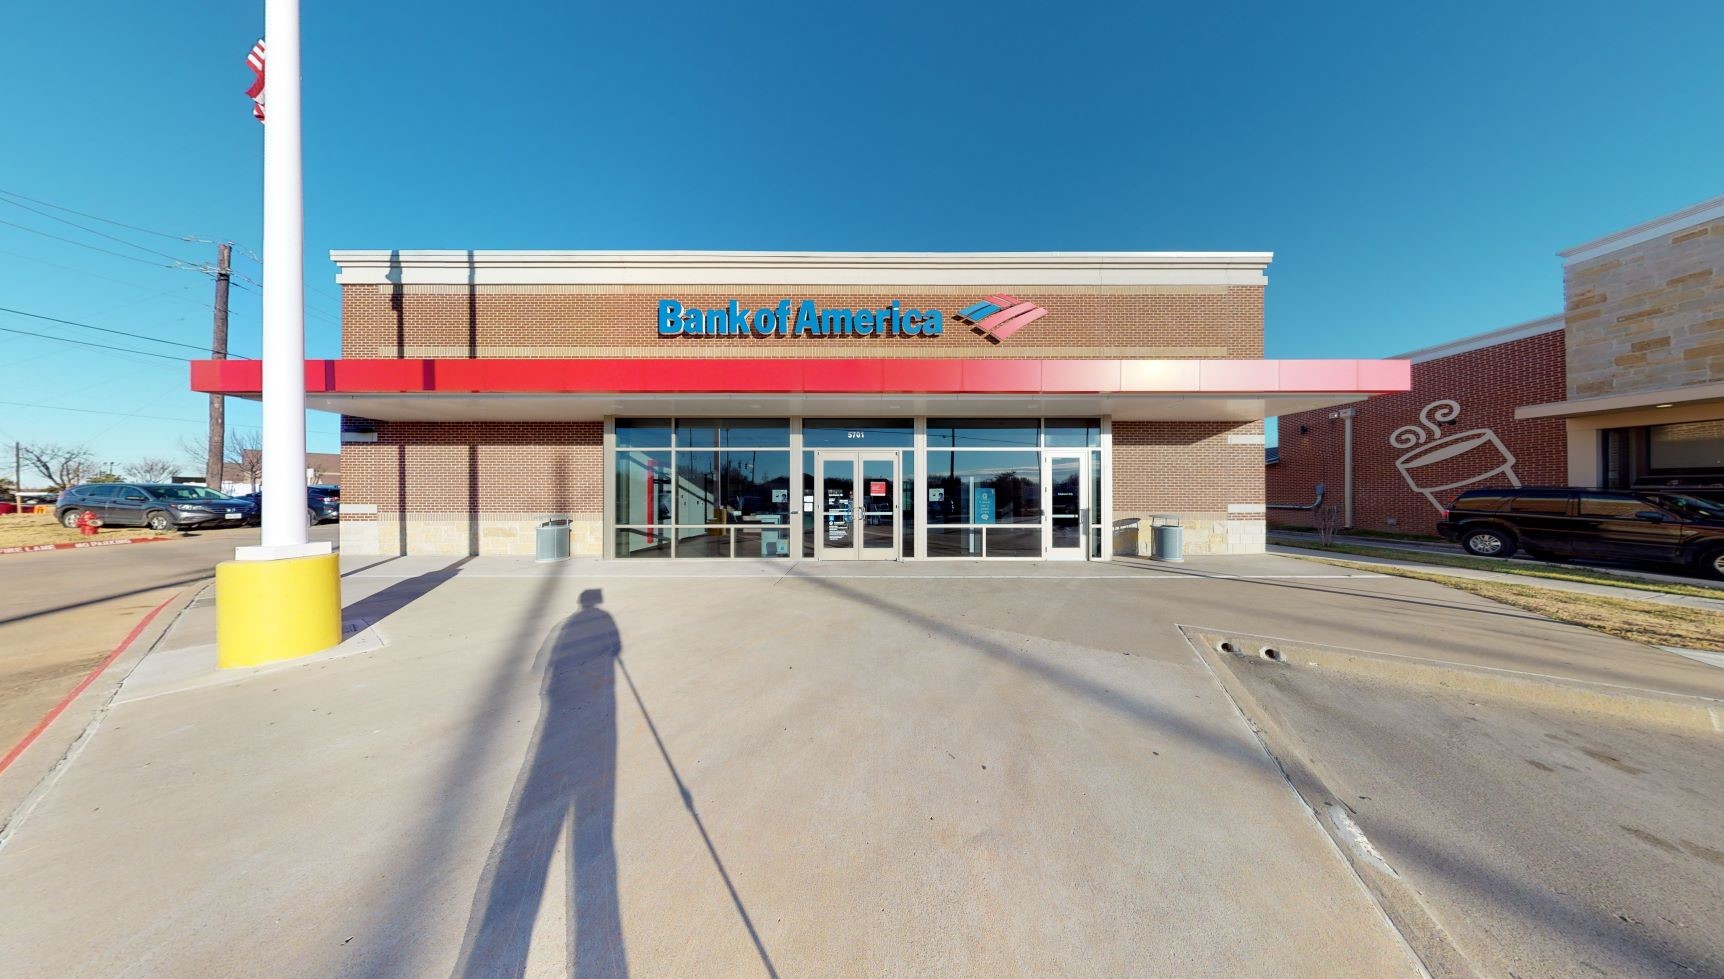 Bank of America financial center with drive-thru ATM | 5701 Colleyville Blvd, Colleyville, TX 76034